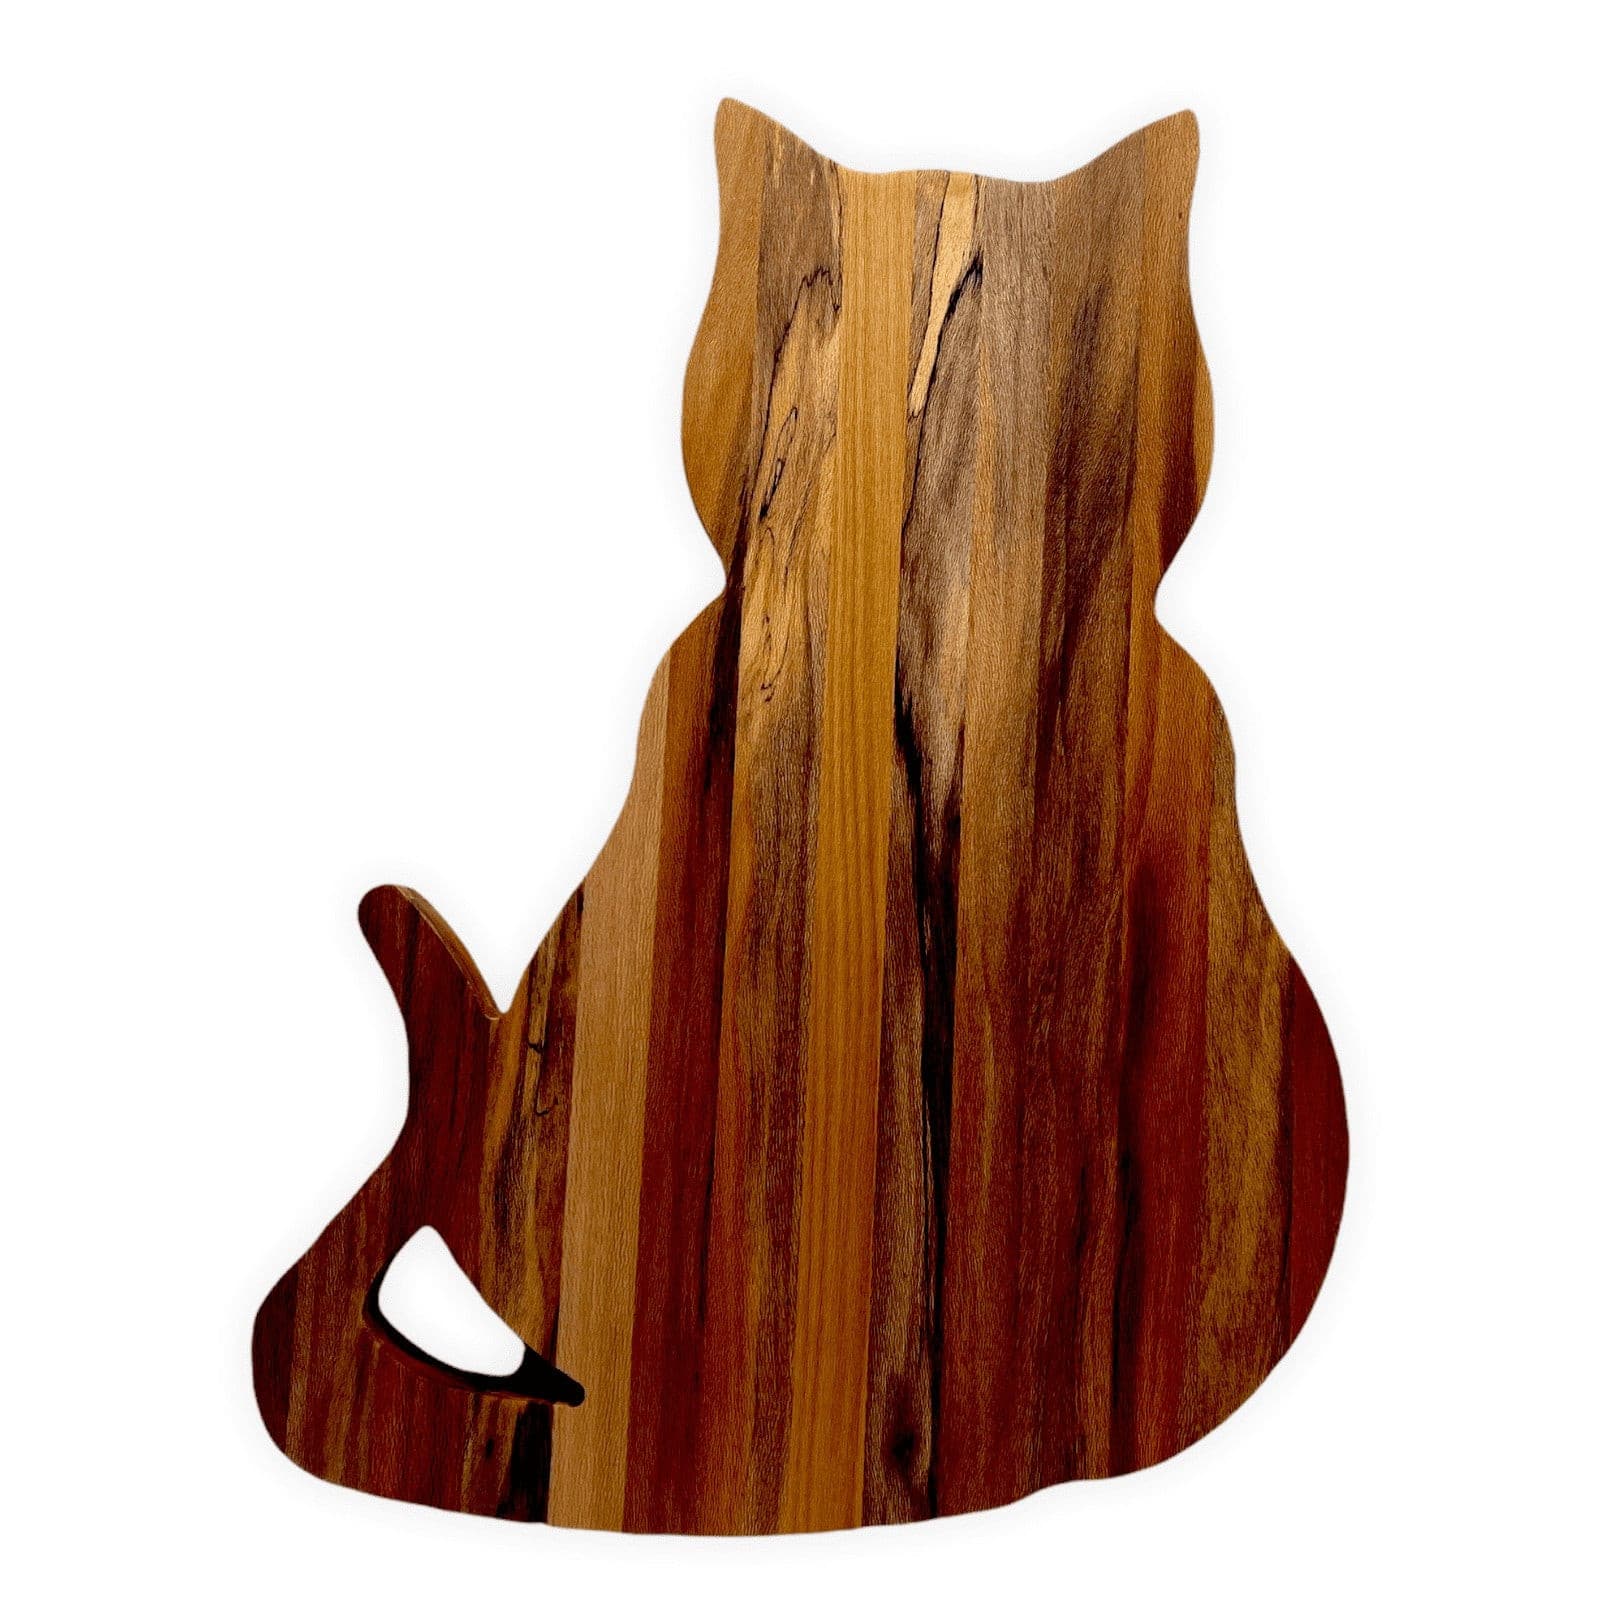 Cat Shaped Charcuterie Board - Heirloom Cat Shaped American Beech CharCATerie Board Looking Up, LLC